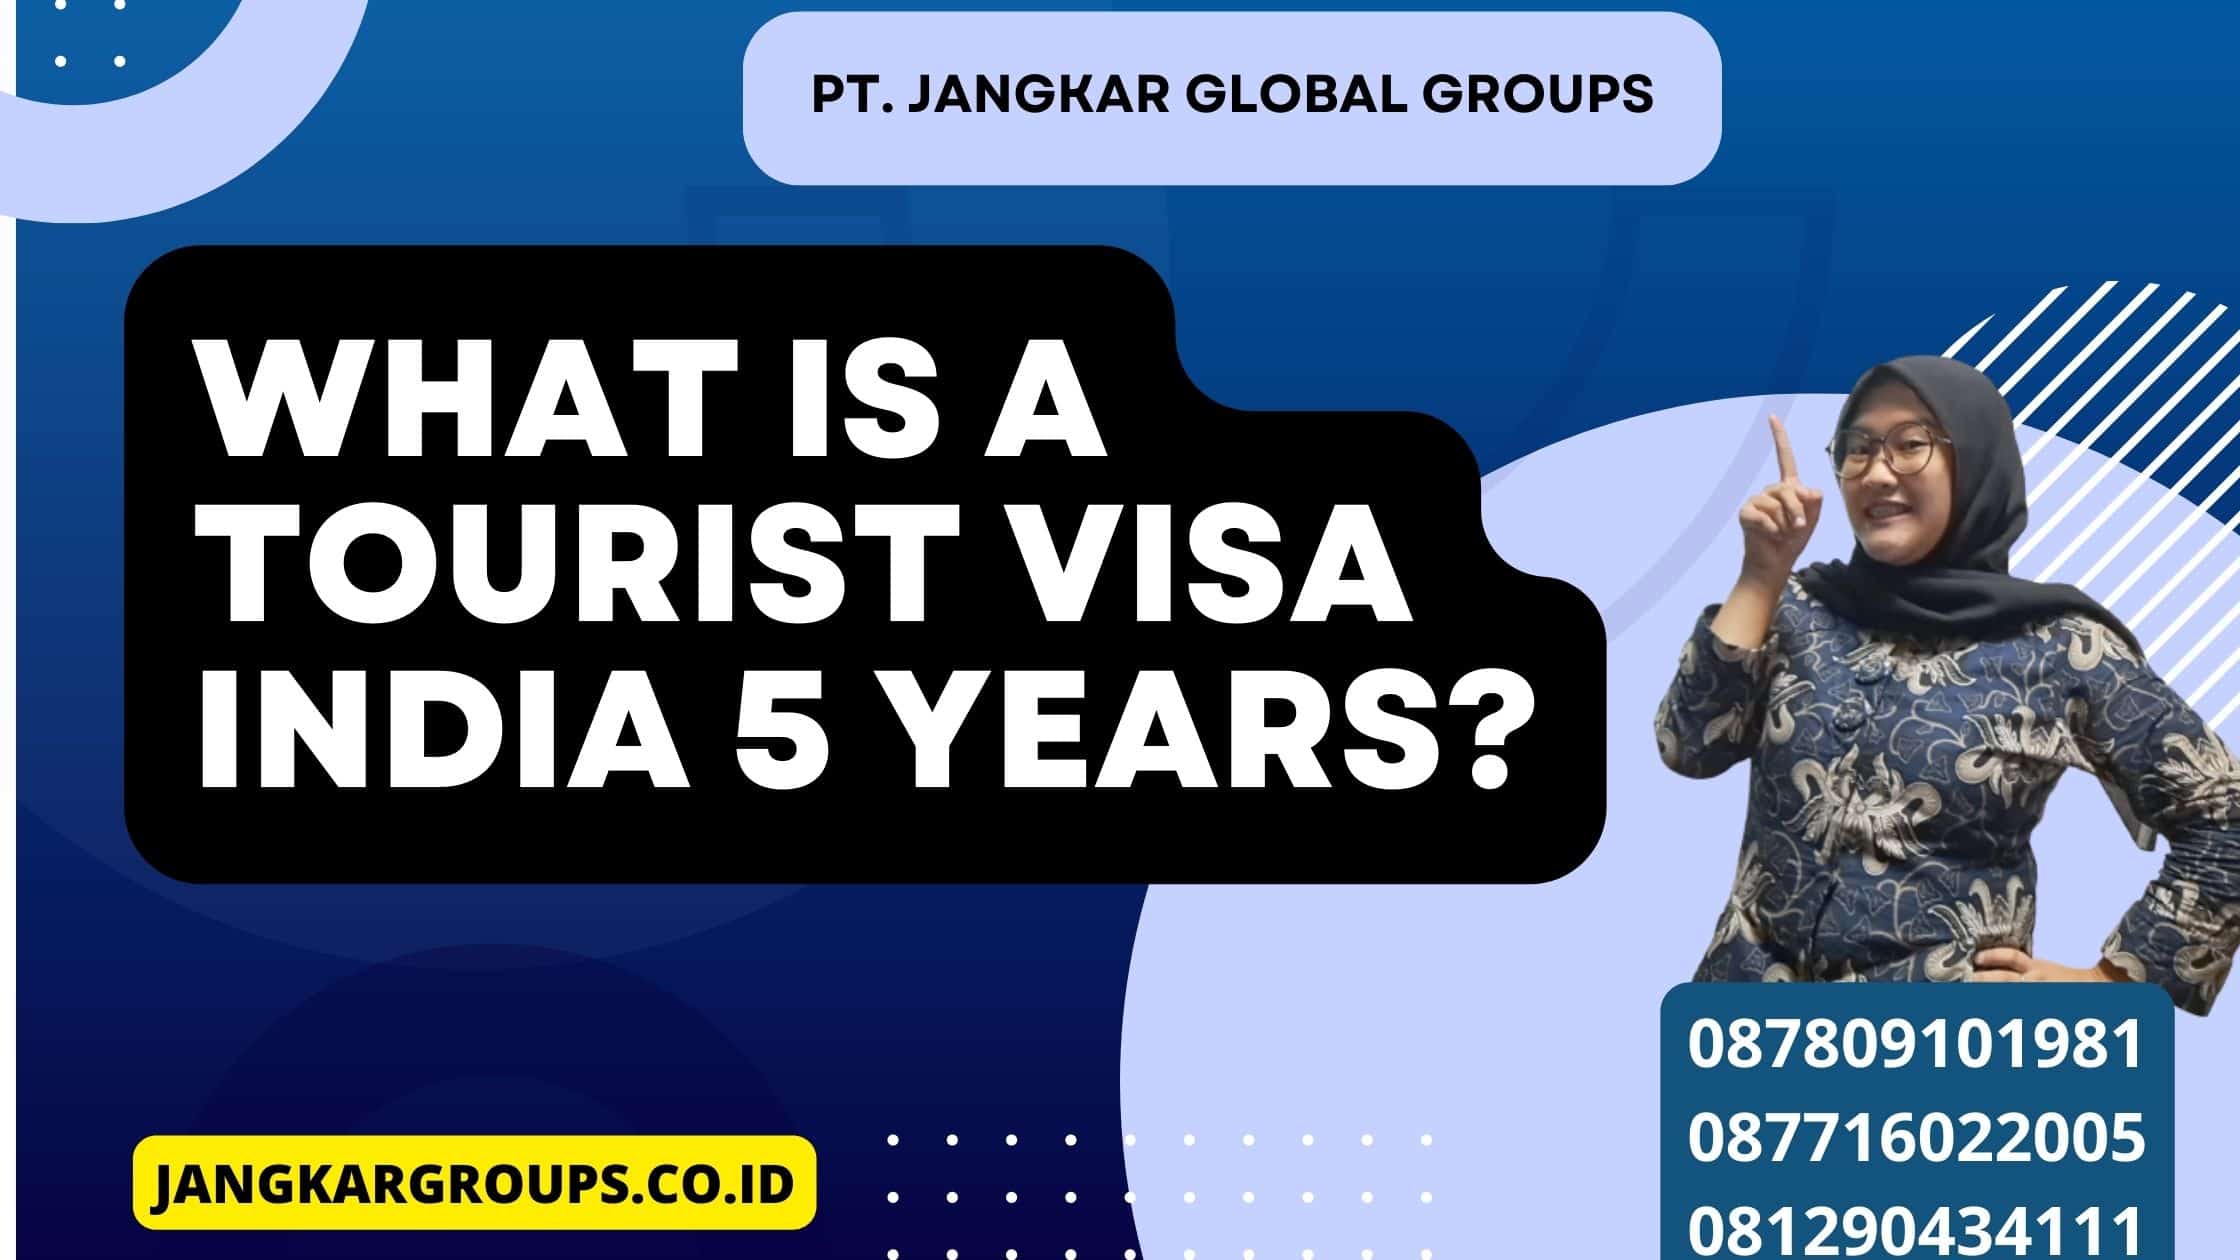 What is a Tourist Visa India 5 Years?